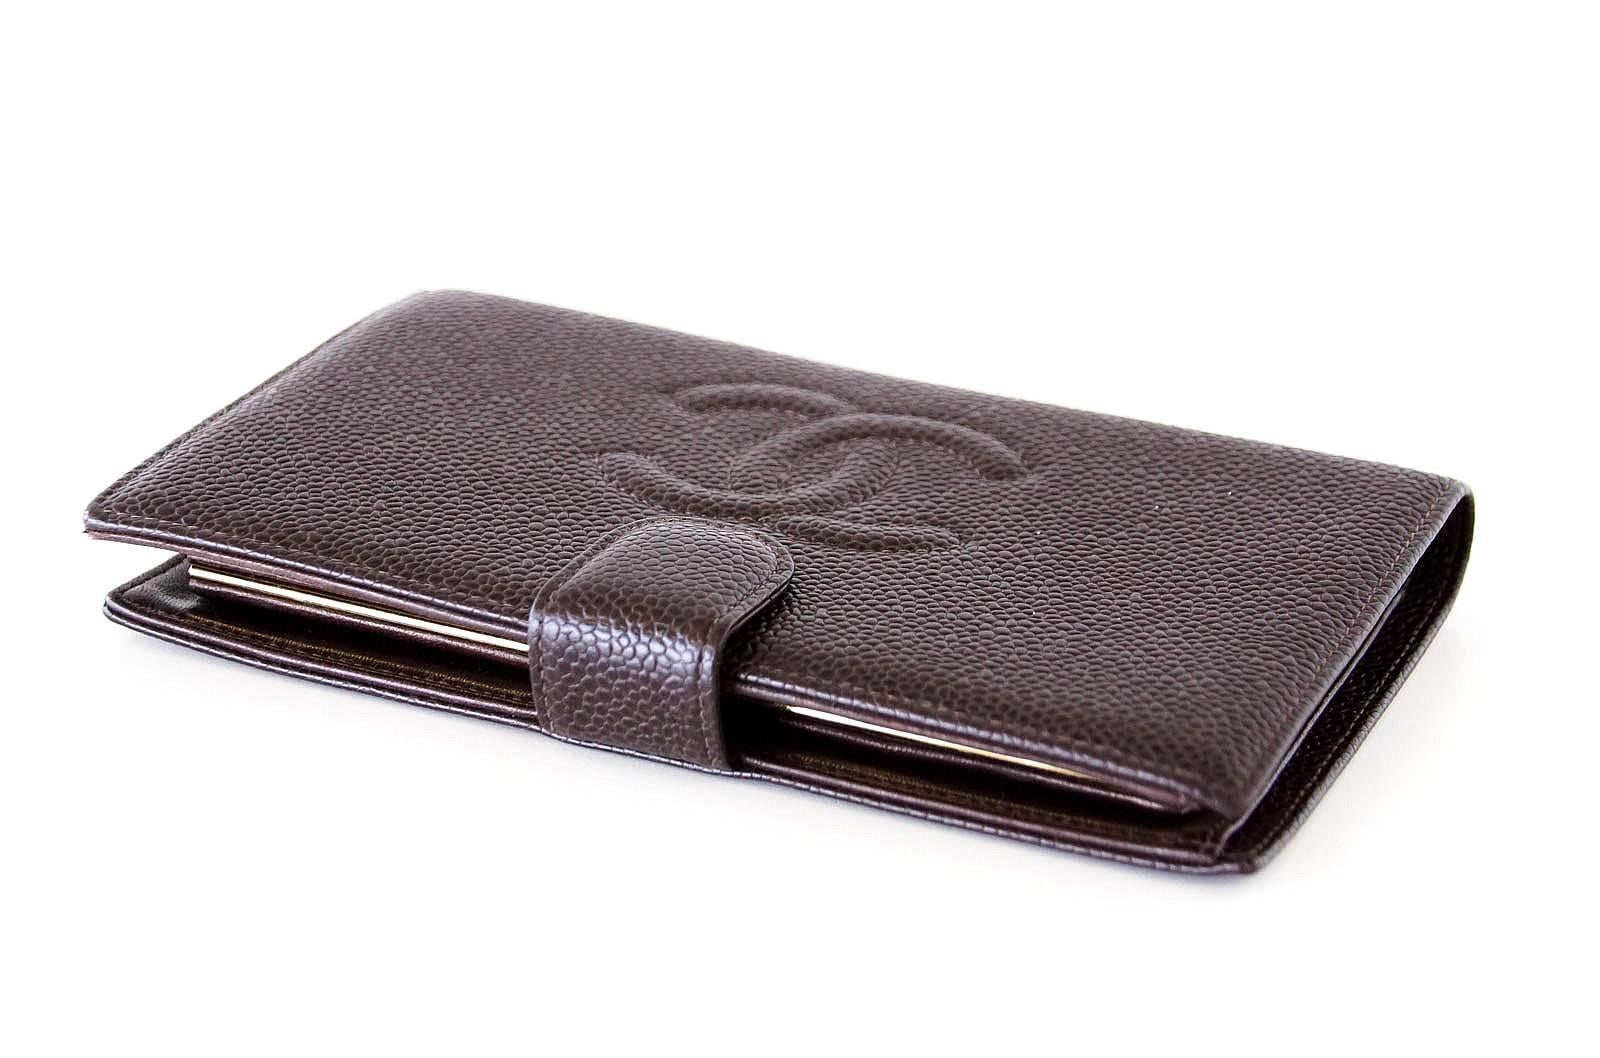 Guaranteed authentic Chanel vintage long bifold brown caviar leather wallet.
Front CC embossed logo. 
6 credit card slots.
Checkbook slot and change purse with embossed snap close.
Exterior is in mint condition; interior is gently marked from